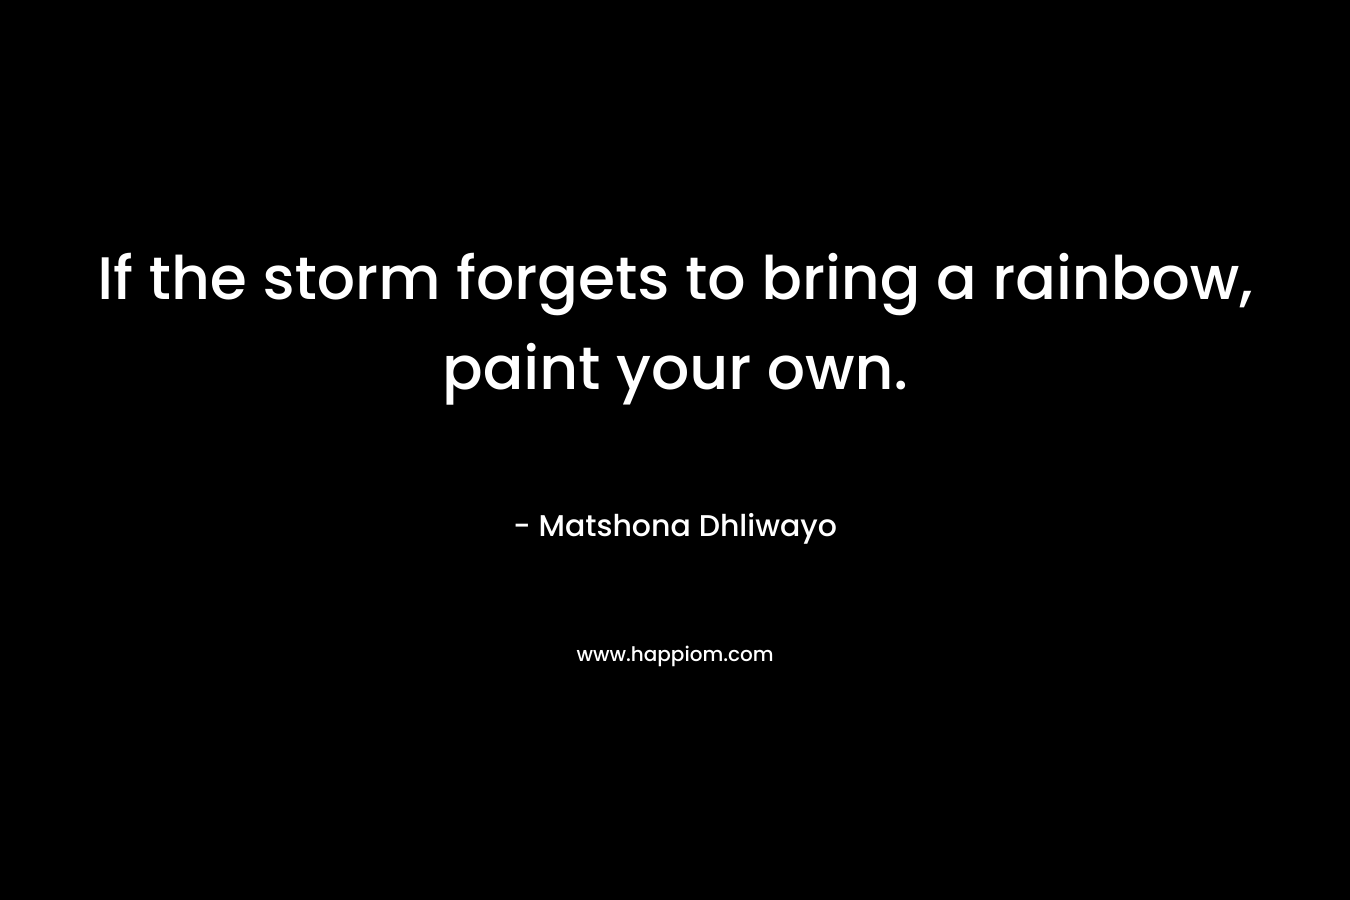 If the storm forgets to bring a rainbow, paint your own.